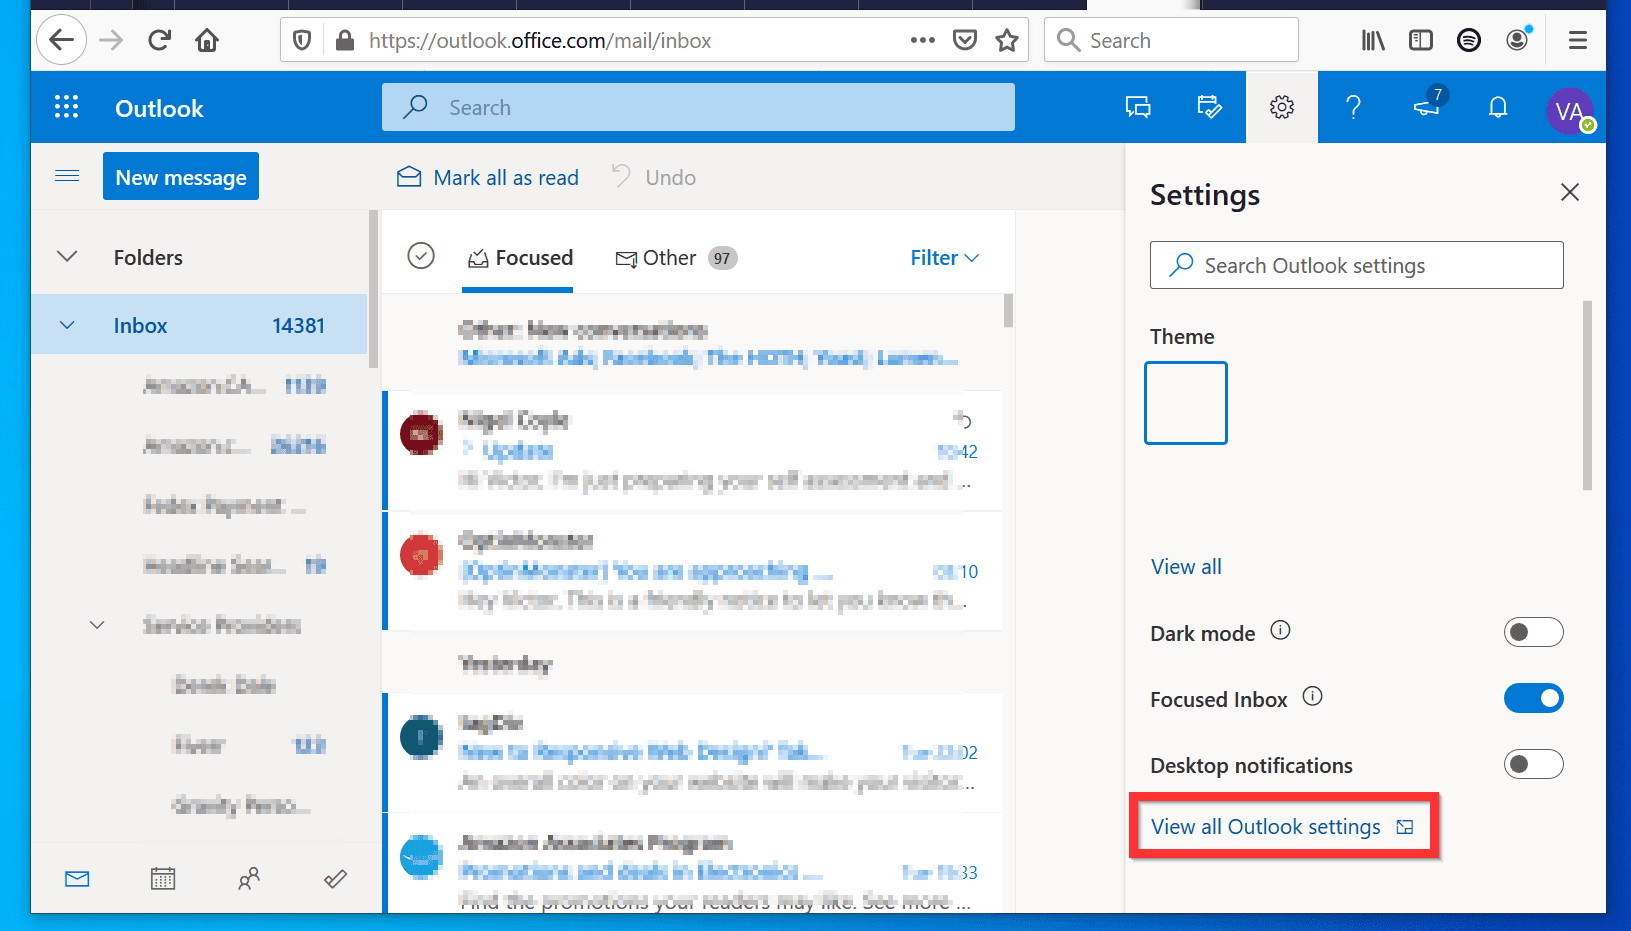 how do i add a email signature in outlook